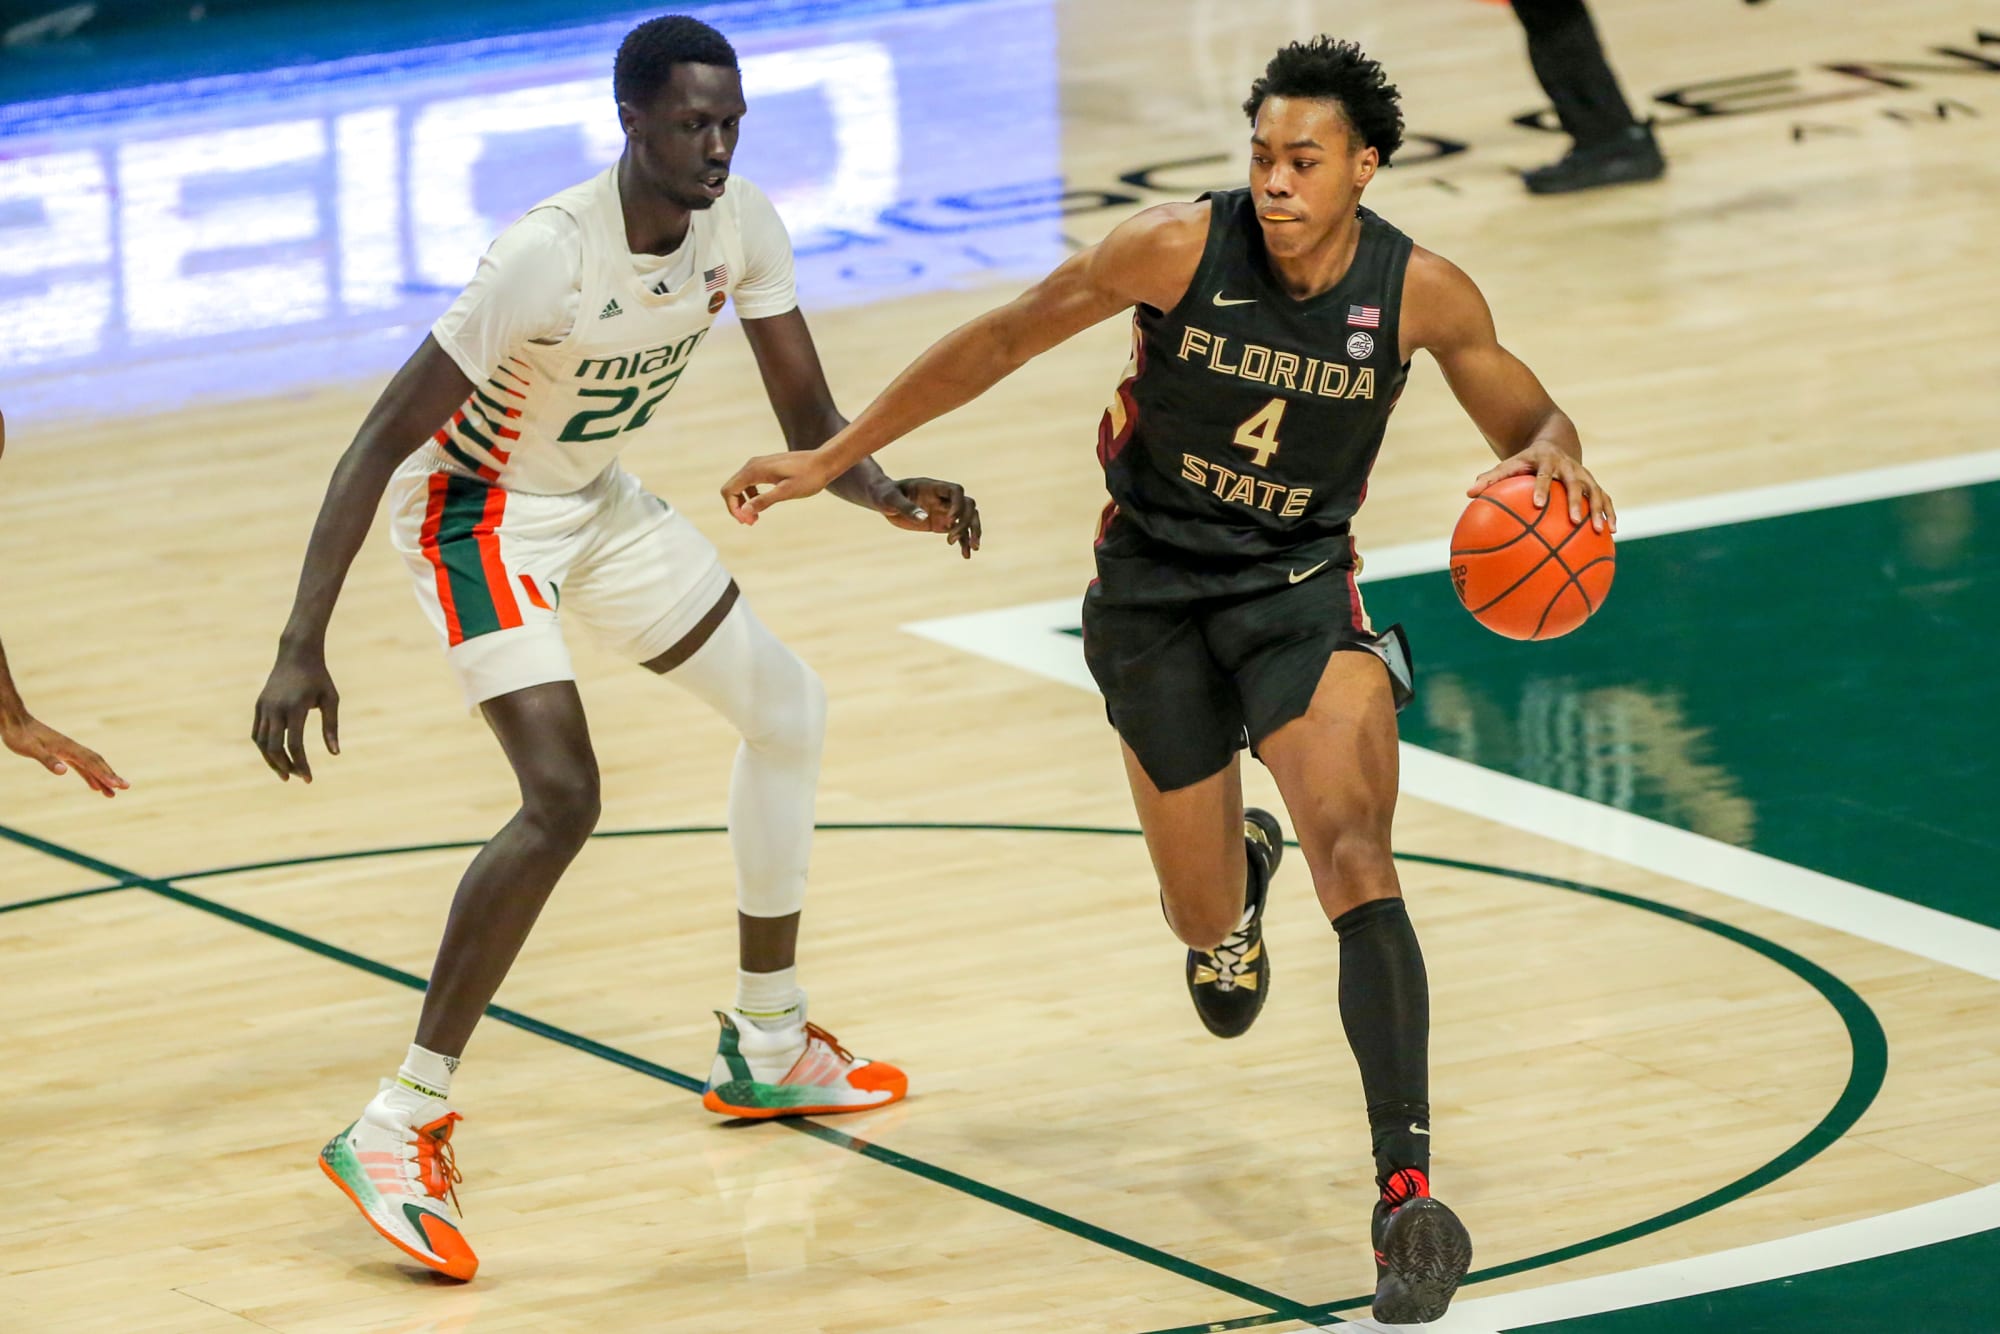 NBA Draft 2021: Grades for all 30 draft picks from the first round